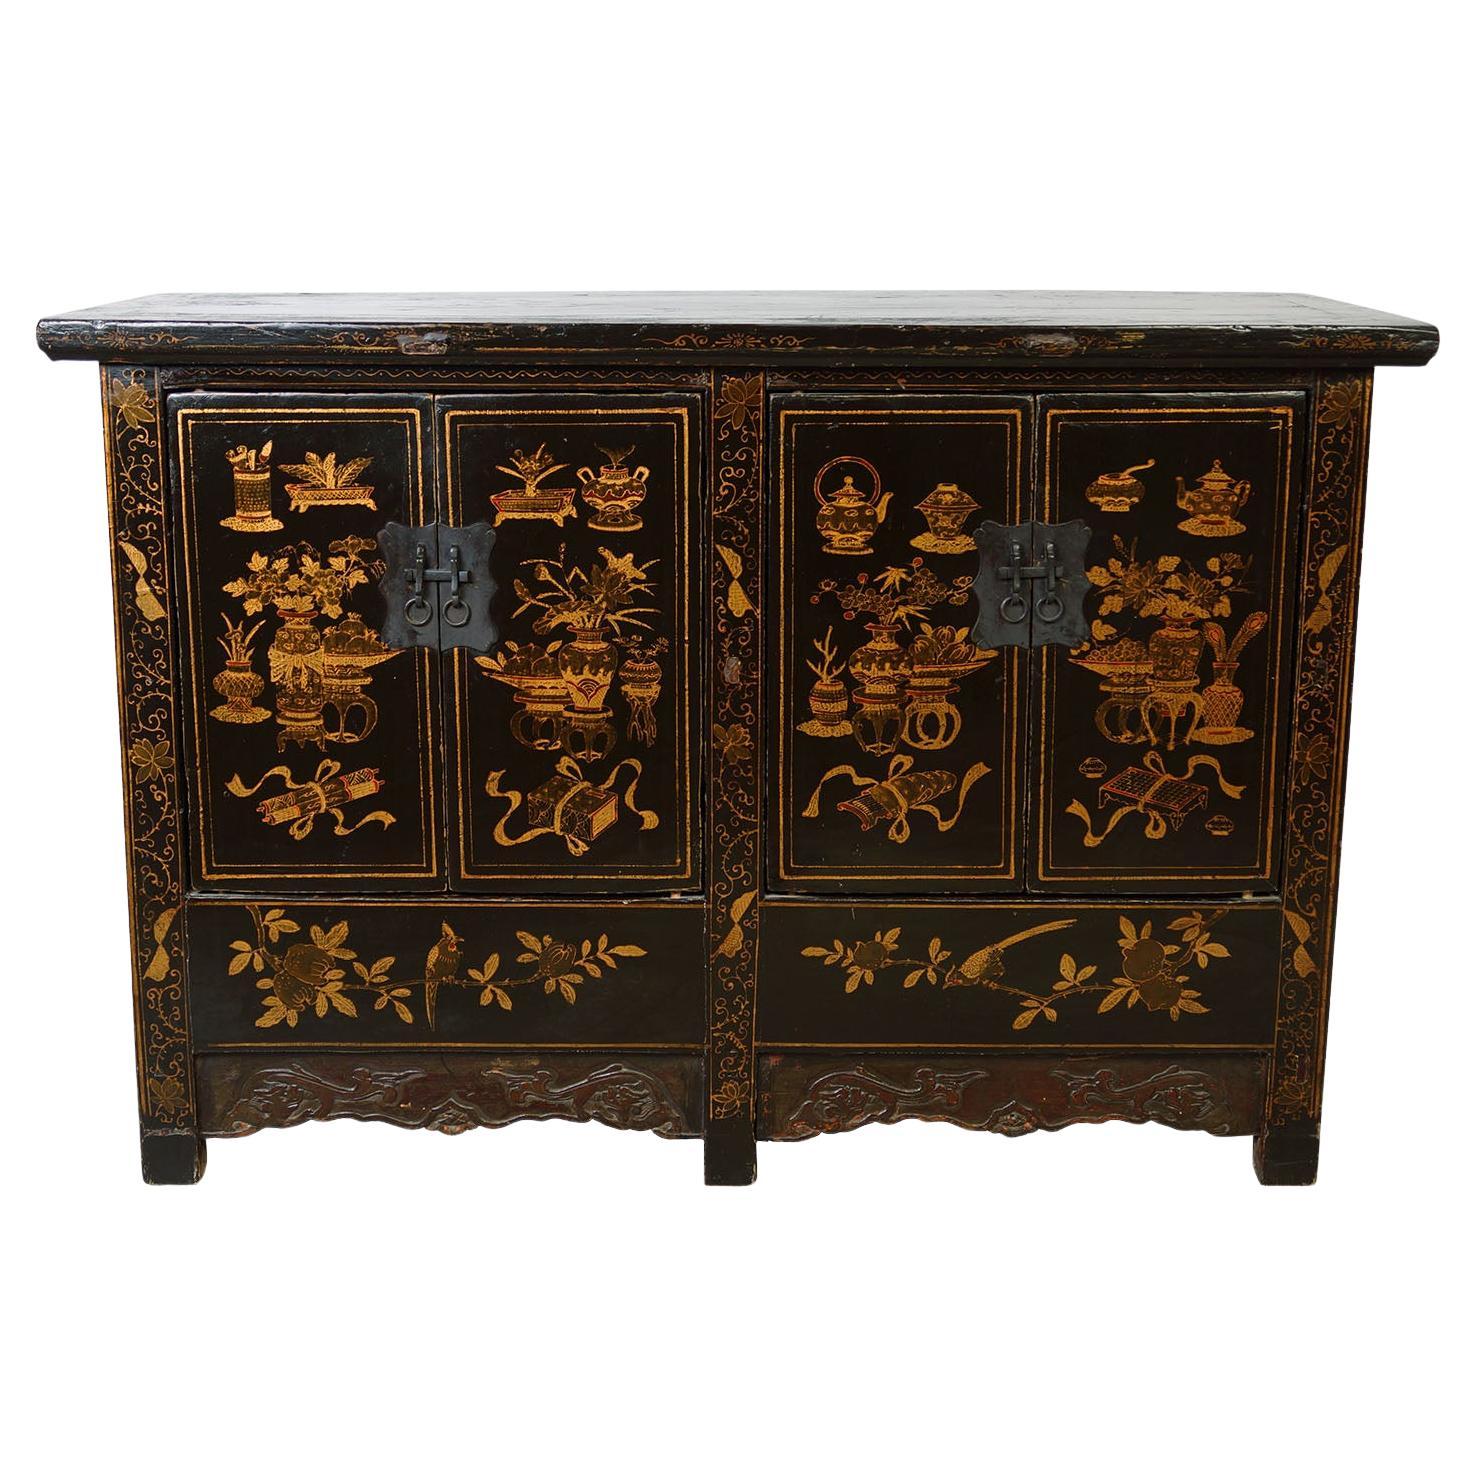 19th Century Antique Chinese Gilt Black Twin Cabinet/Buffet Table, Siderboard